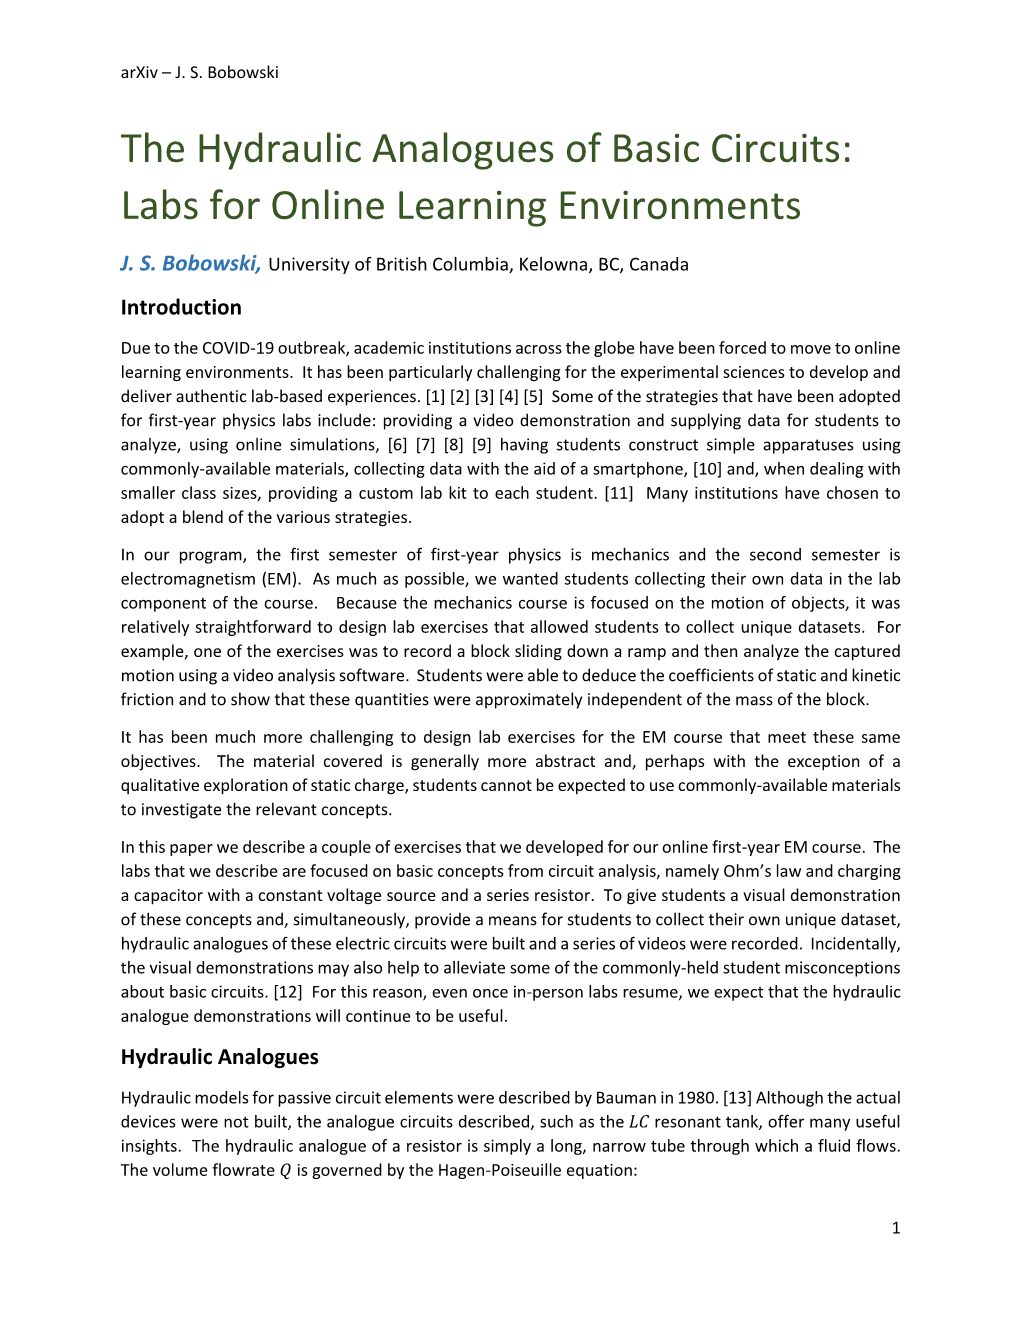 The Hydraulic Analogues of Basic Circuits: Labs for Online Learning Environments